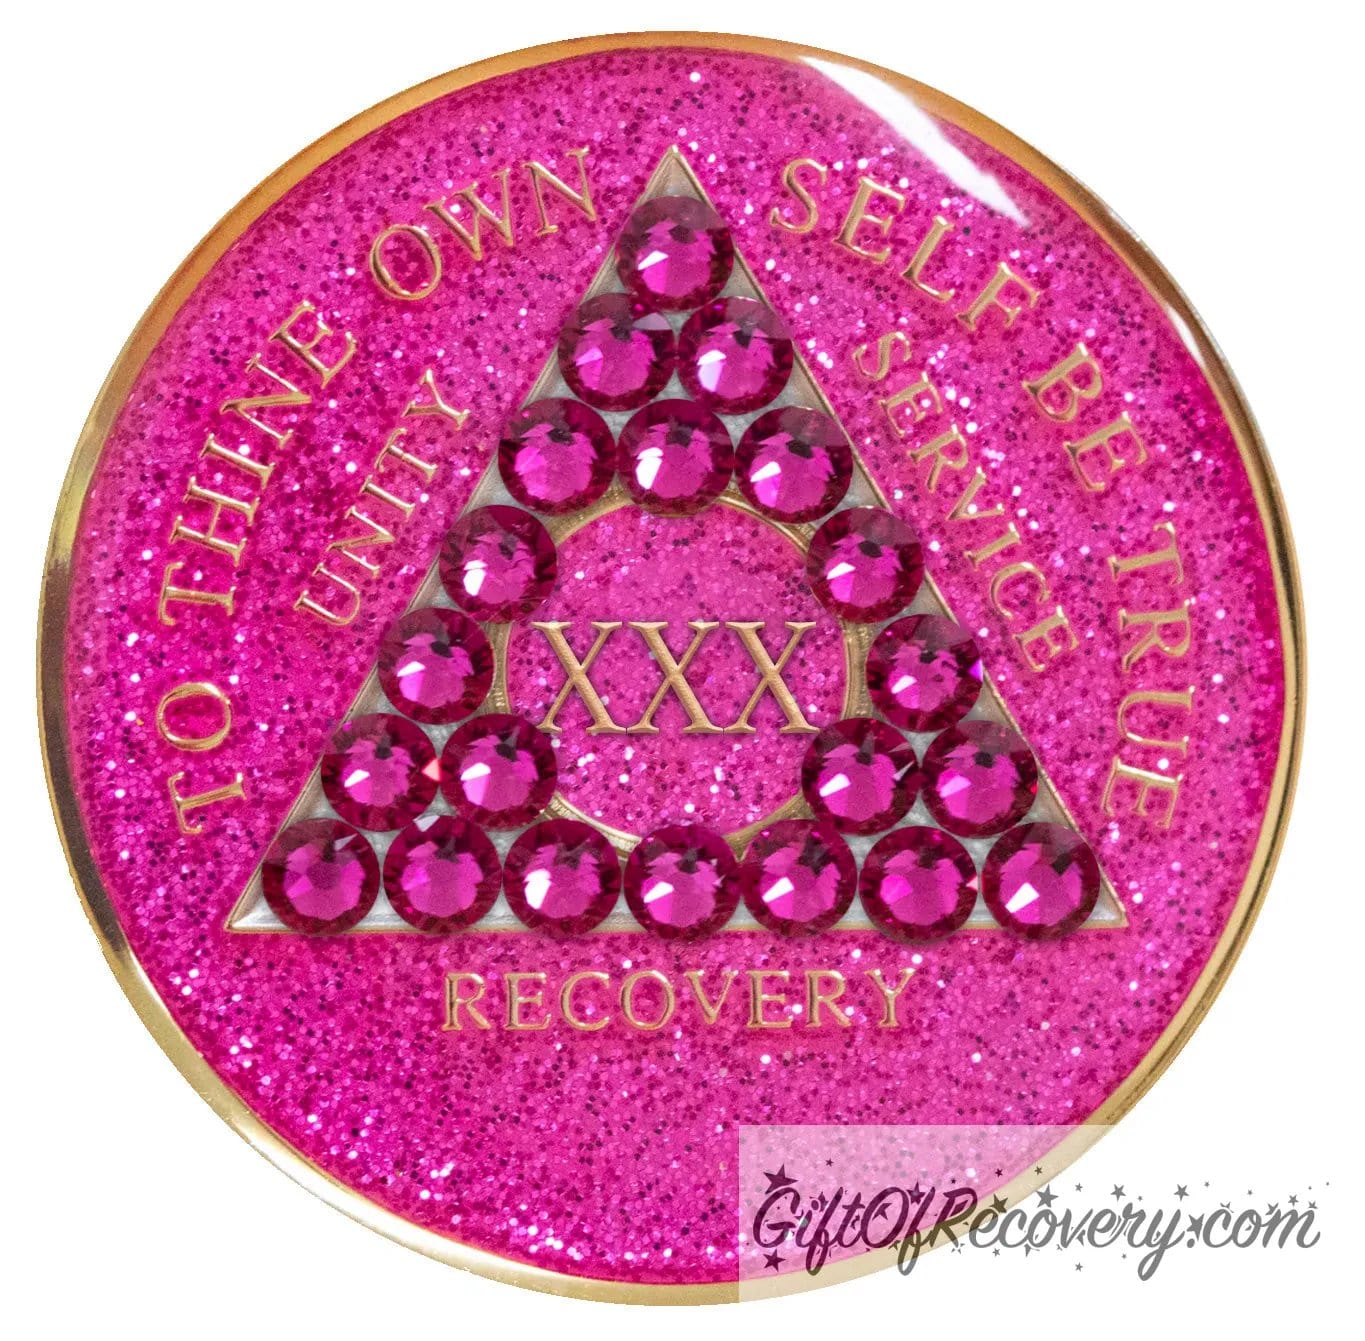 30 year Princess Pink Glitter AA medallion with 21 genuine fuchsia crystals in the shape of a triangle in the center of the recovery medallion, for your favorite sober princess, and to thine own self be true, unity, service, recovery, the roman numeral in the middle, and the outer rim, embossed in 14k plated brass, the aa medallion is sealed in resin for a shiny finish.